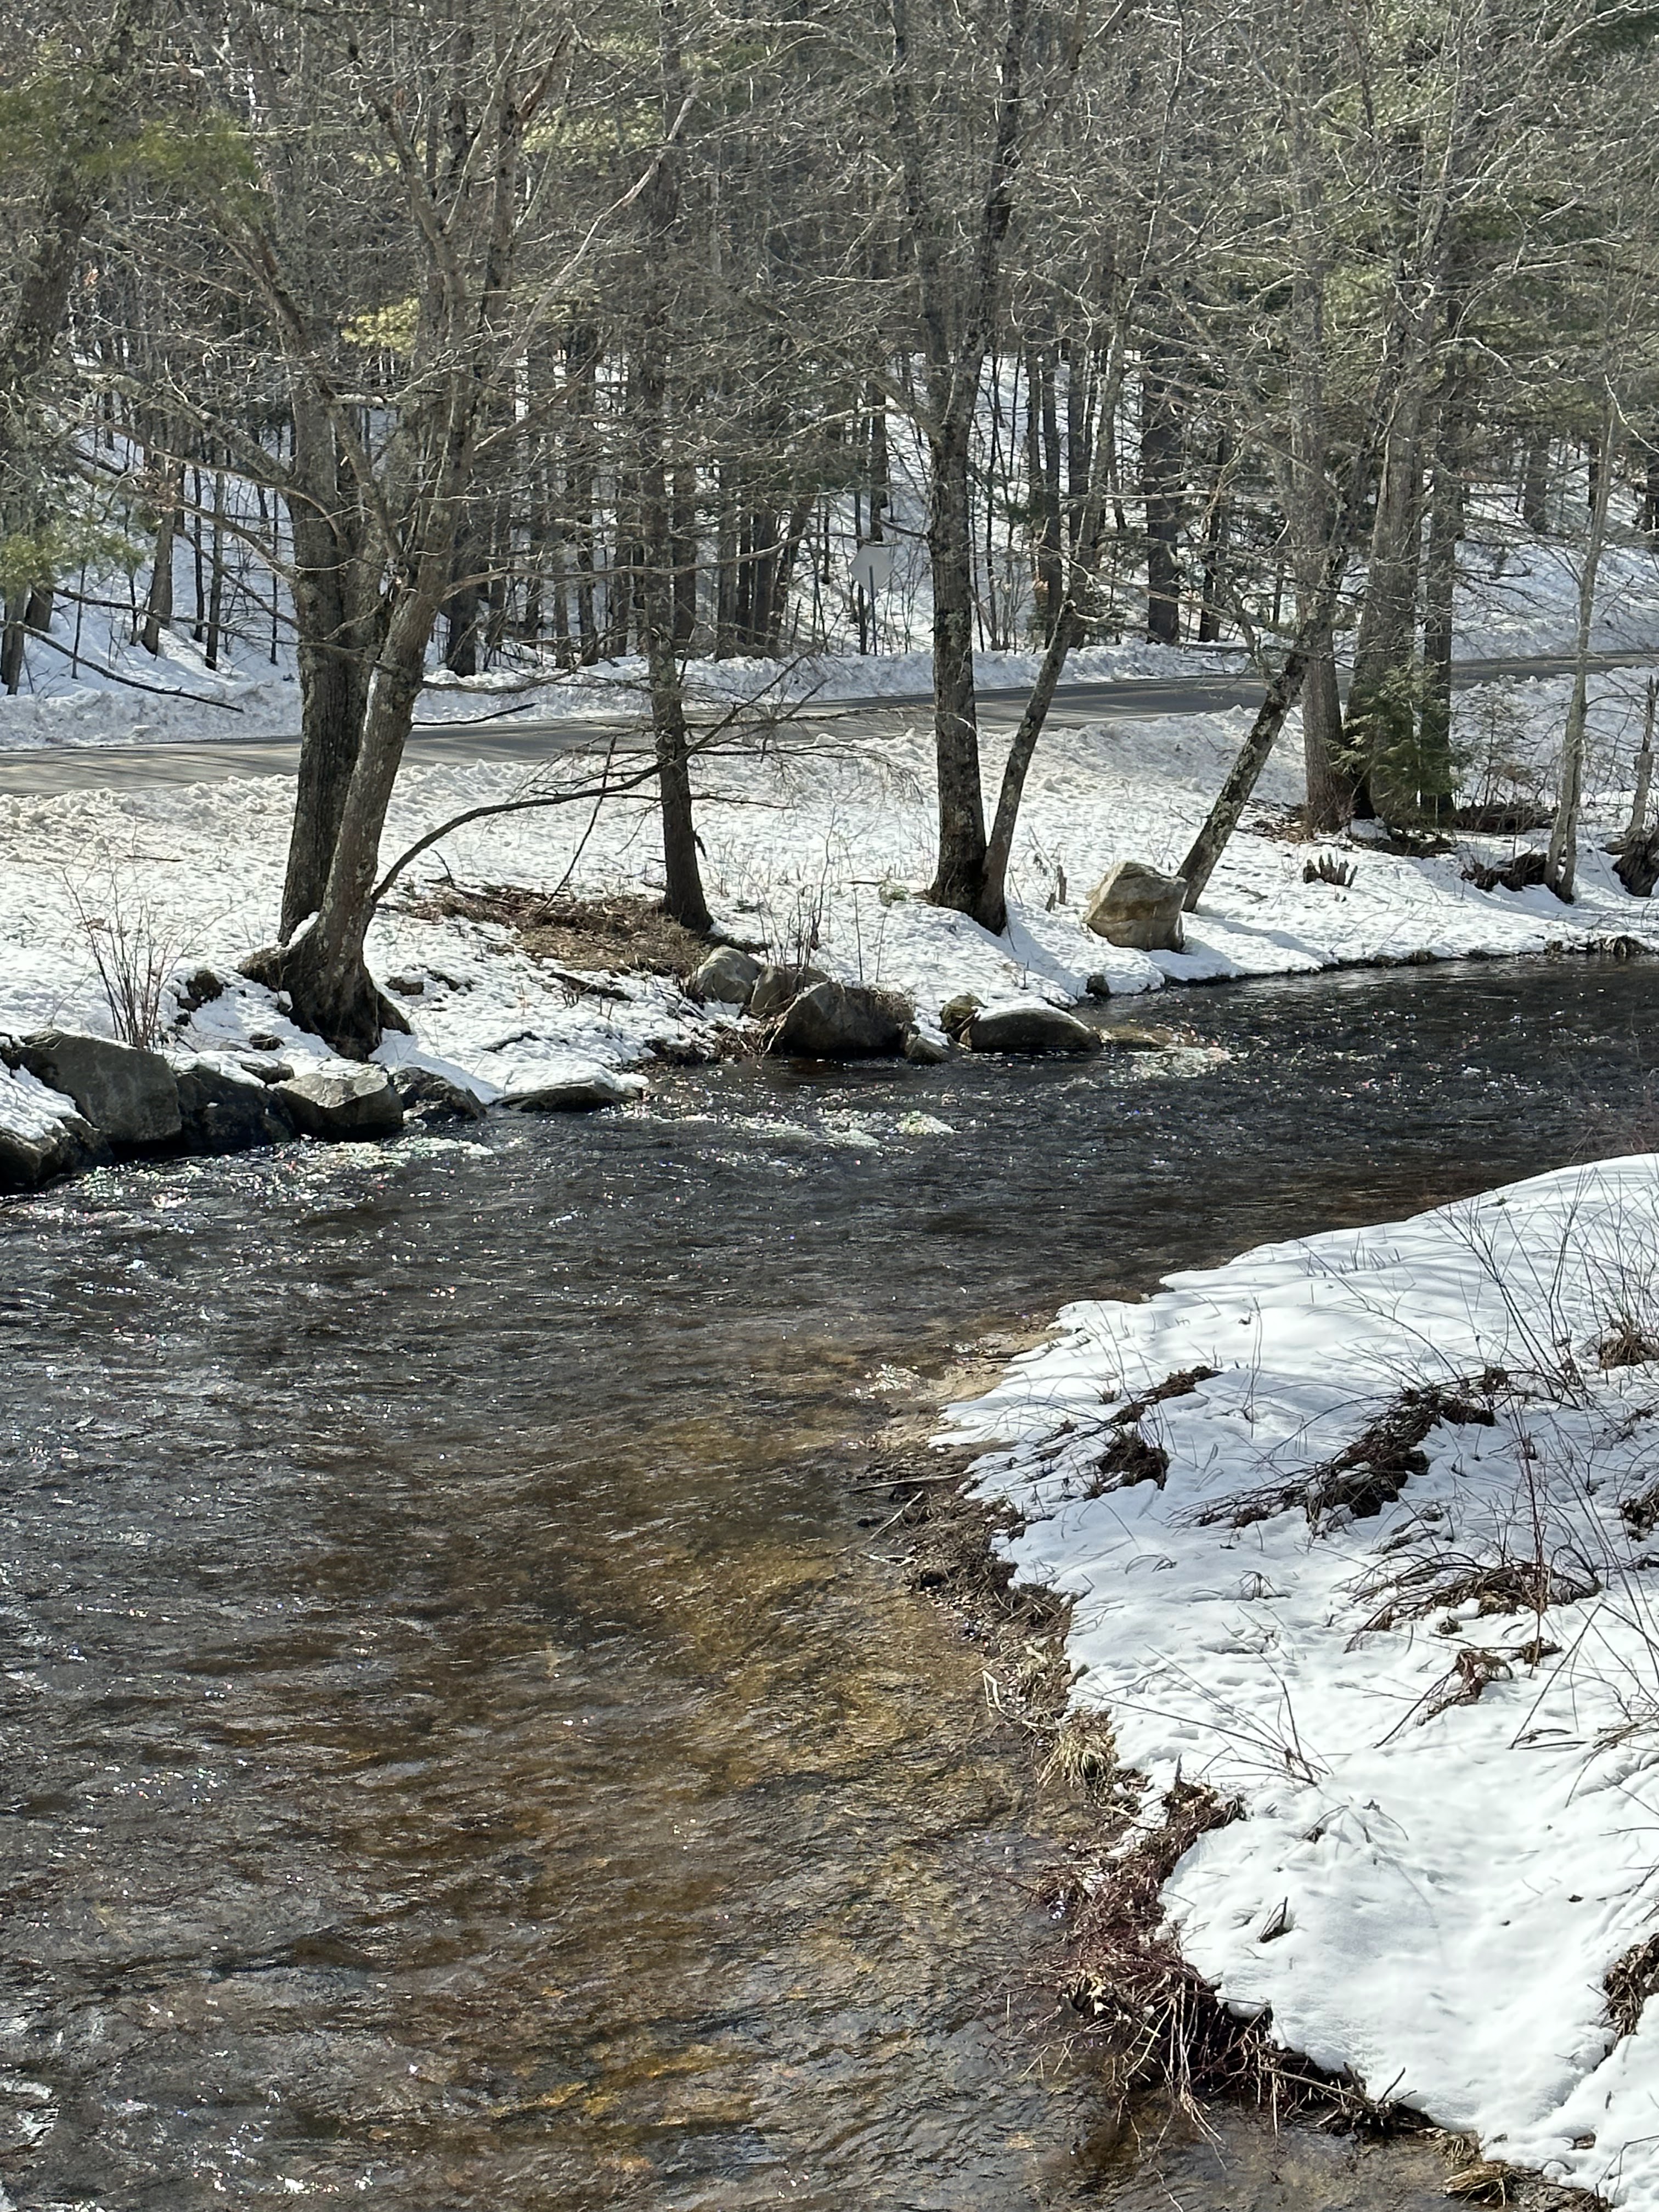 New Hampshire personal injury lawyer Attorney Buckley features this photo of a New Hamphire river flowing towards the photographer. On the left bank, sparse trees with no leaves lean over the river. Snow is on the ground, and a road is in the photo's background. On the right bank, some bare shrubs and roots grow on the riverbank.